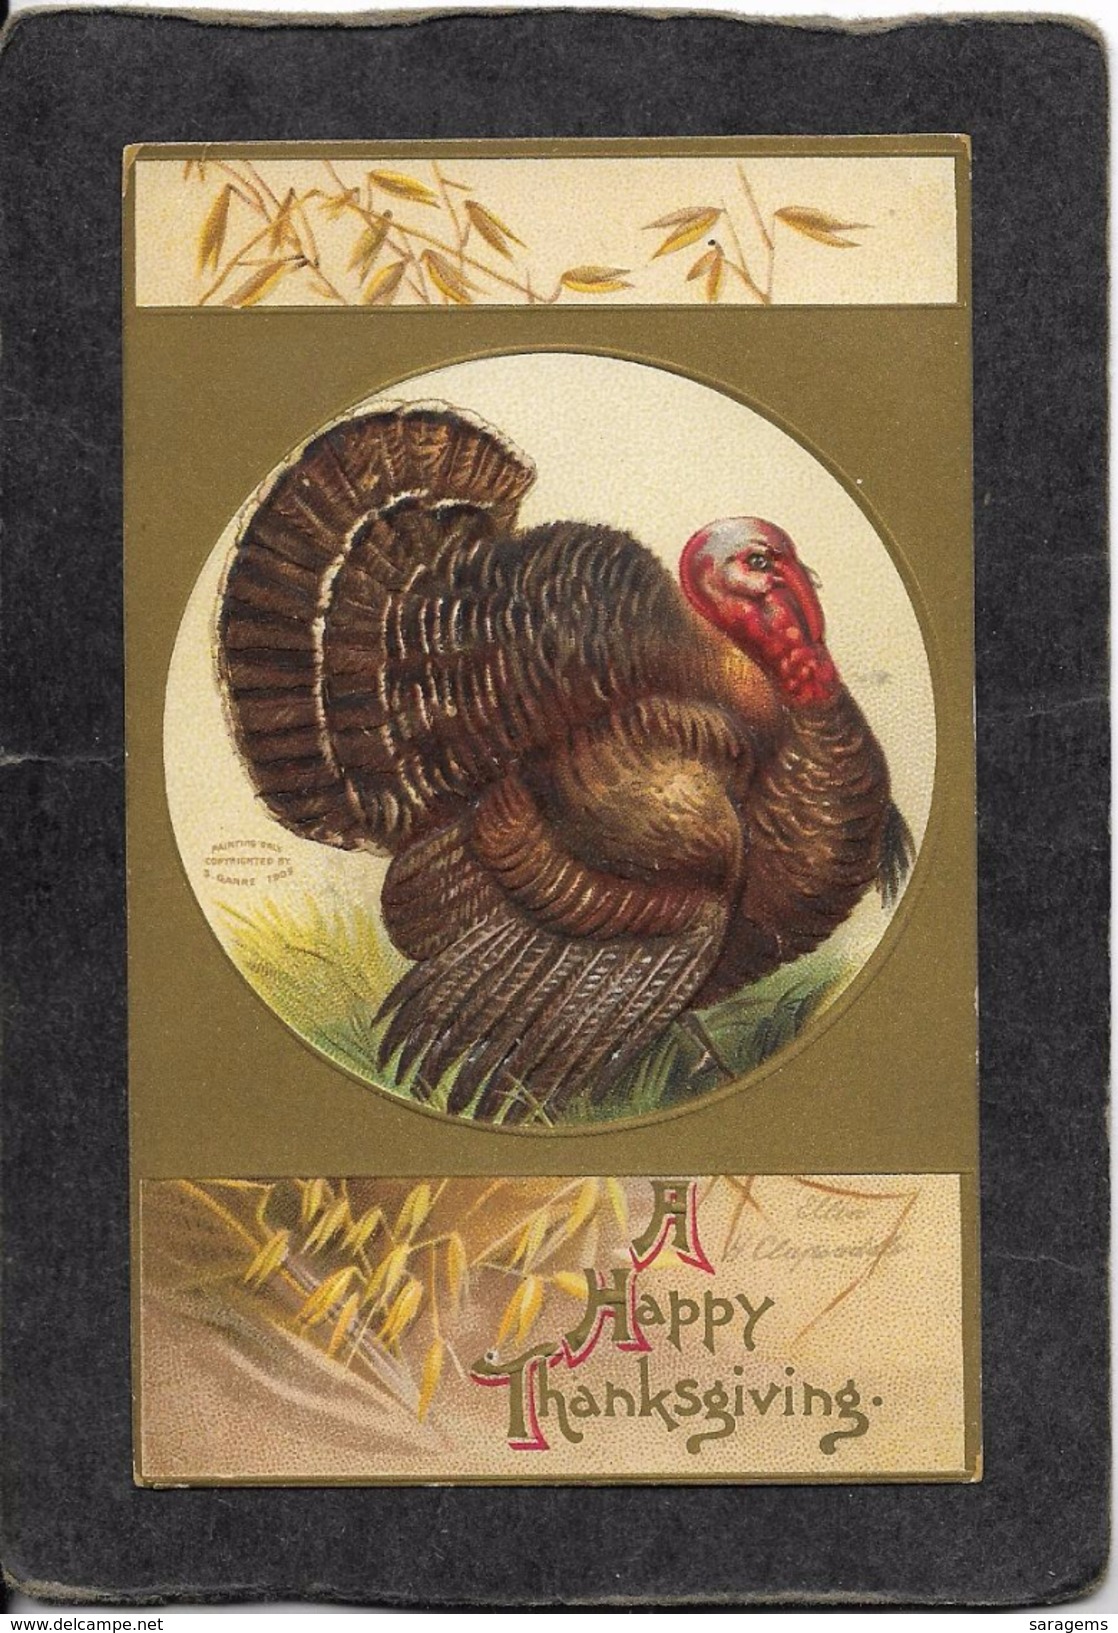 Thanksgiving Turkey(facing Right)"A Happy Thanksgiving"1910 - Ellen Clapsaddle Signed Antique Postcard - Clapsaddle